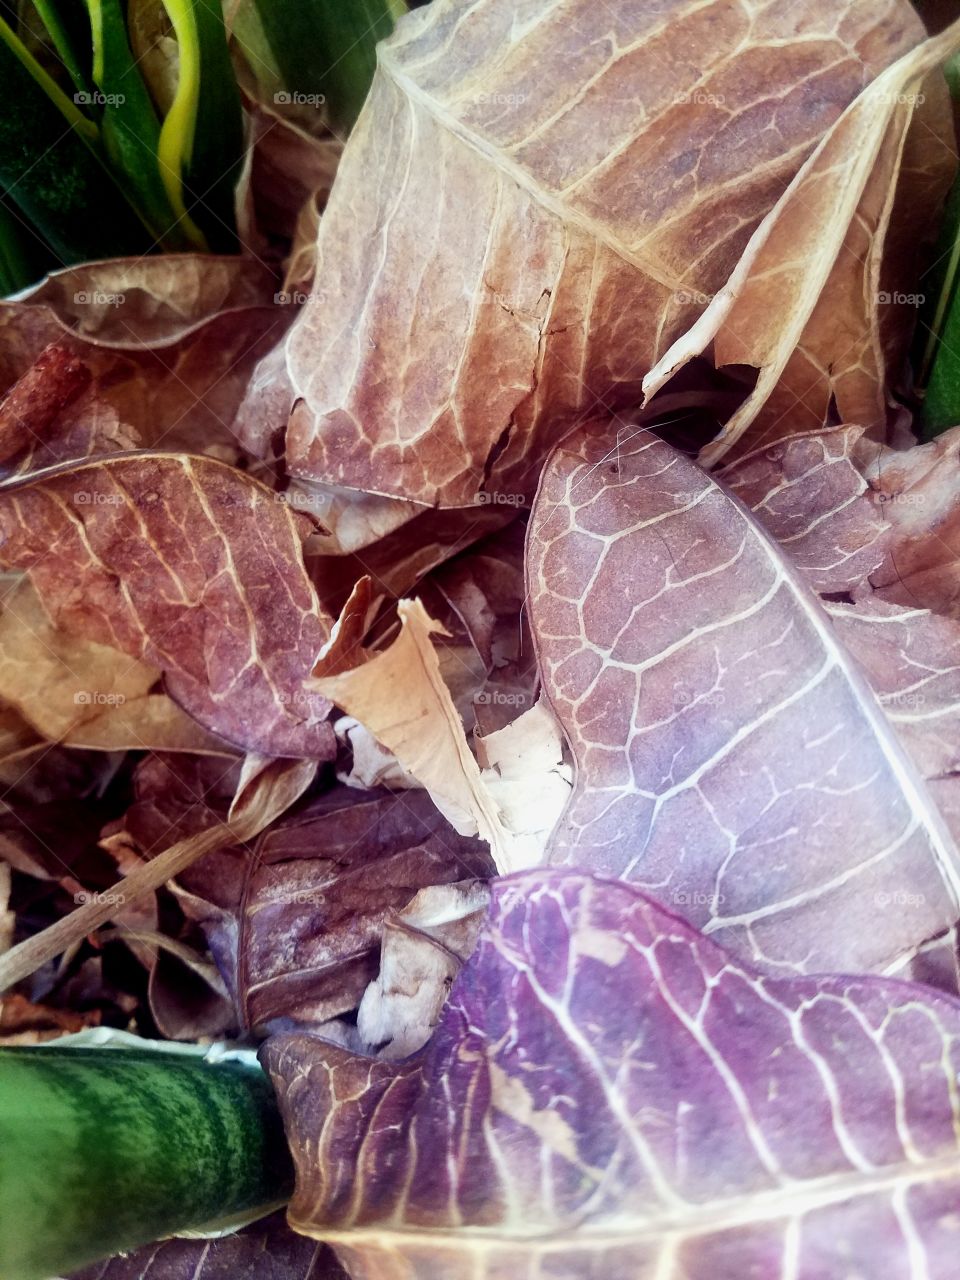 Some colorful dried leaves, with nice visual texture from the veins